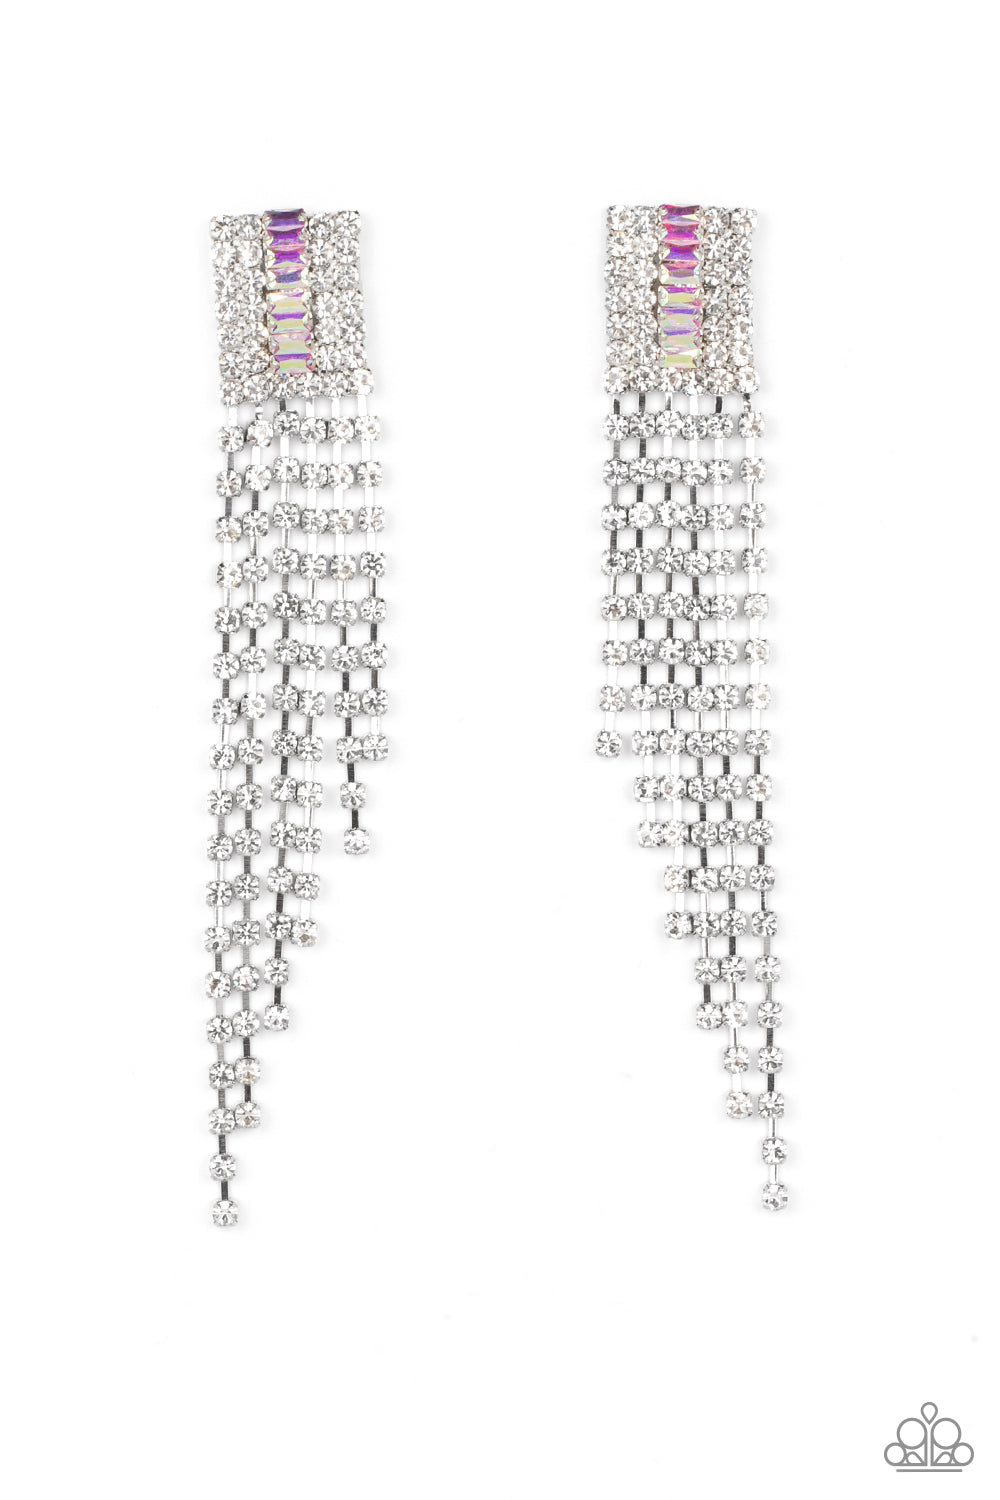 A-Lister Affirmations - Multi Item #P5PO-MTXX-086XX A tapered fringe of glittery white rhinestones streams out from the bottom of a rectangular silver frame. Dotted in rows of blinding white rhinestones, the center of the glitzy fitting is infused with a raised row of emerald cut iridescent rhinestones for a dramatic dazzle. Due to its prismatic palette, color may vary. Earring attaches to a standard post fitting.  Sold as one pair of post earrings.